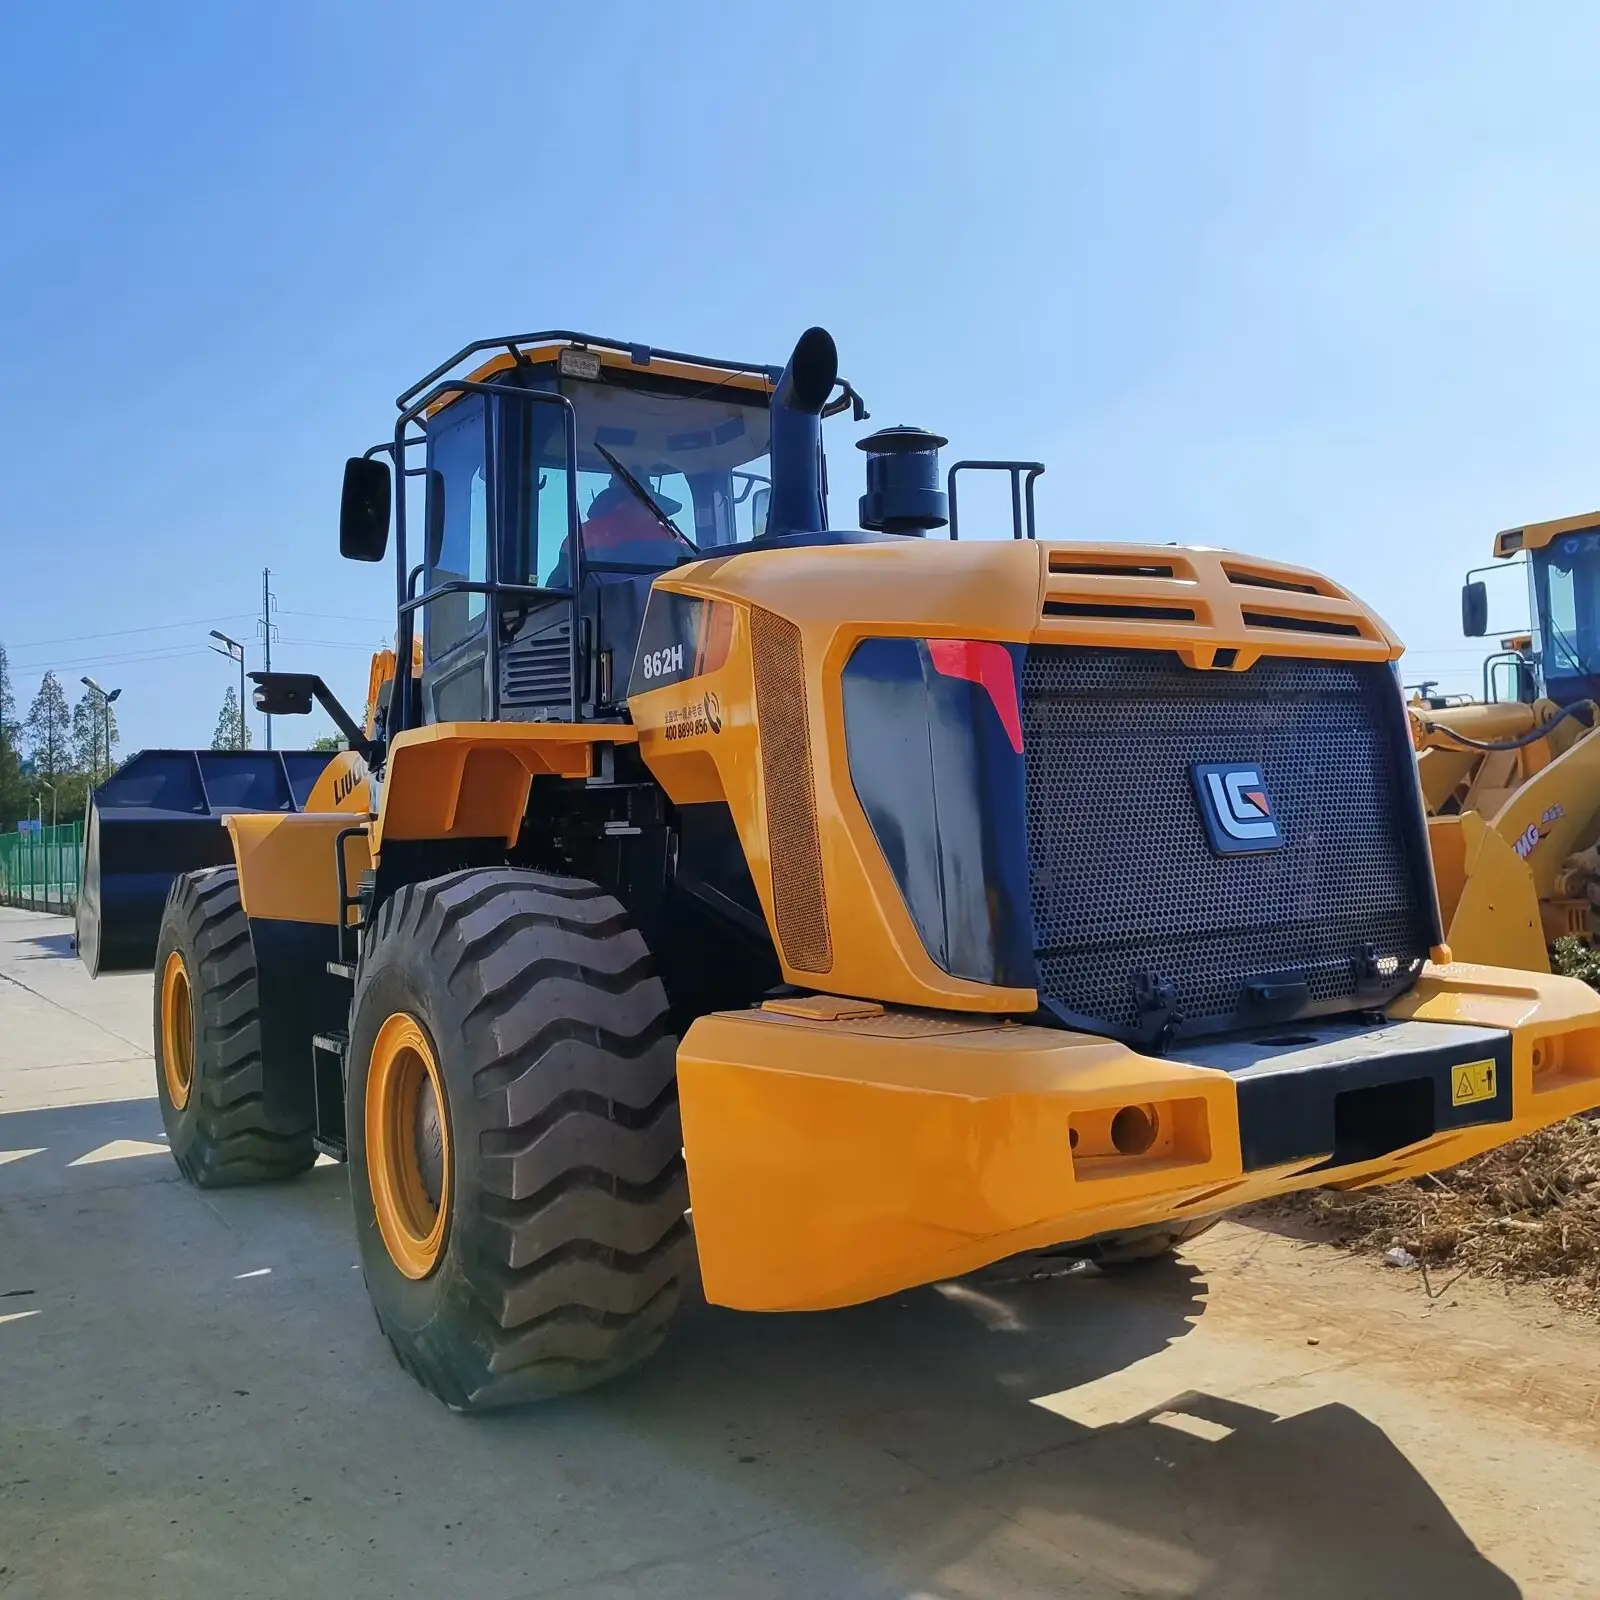 Free spare parts Used LiuGong 50 60 Loader LiuGong 862H Used 5 tons 6 tons Pilot EFI Shovels Quality assurance for one year